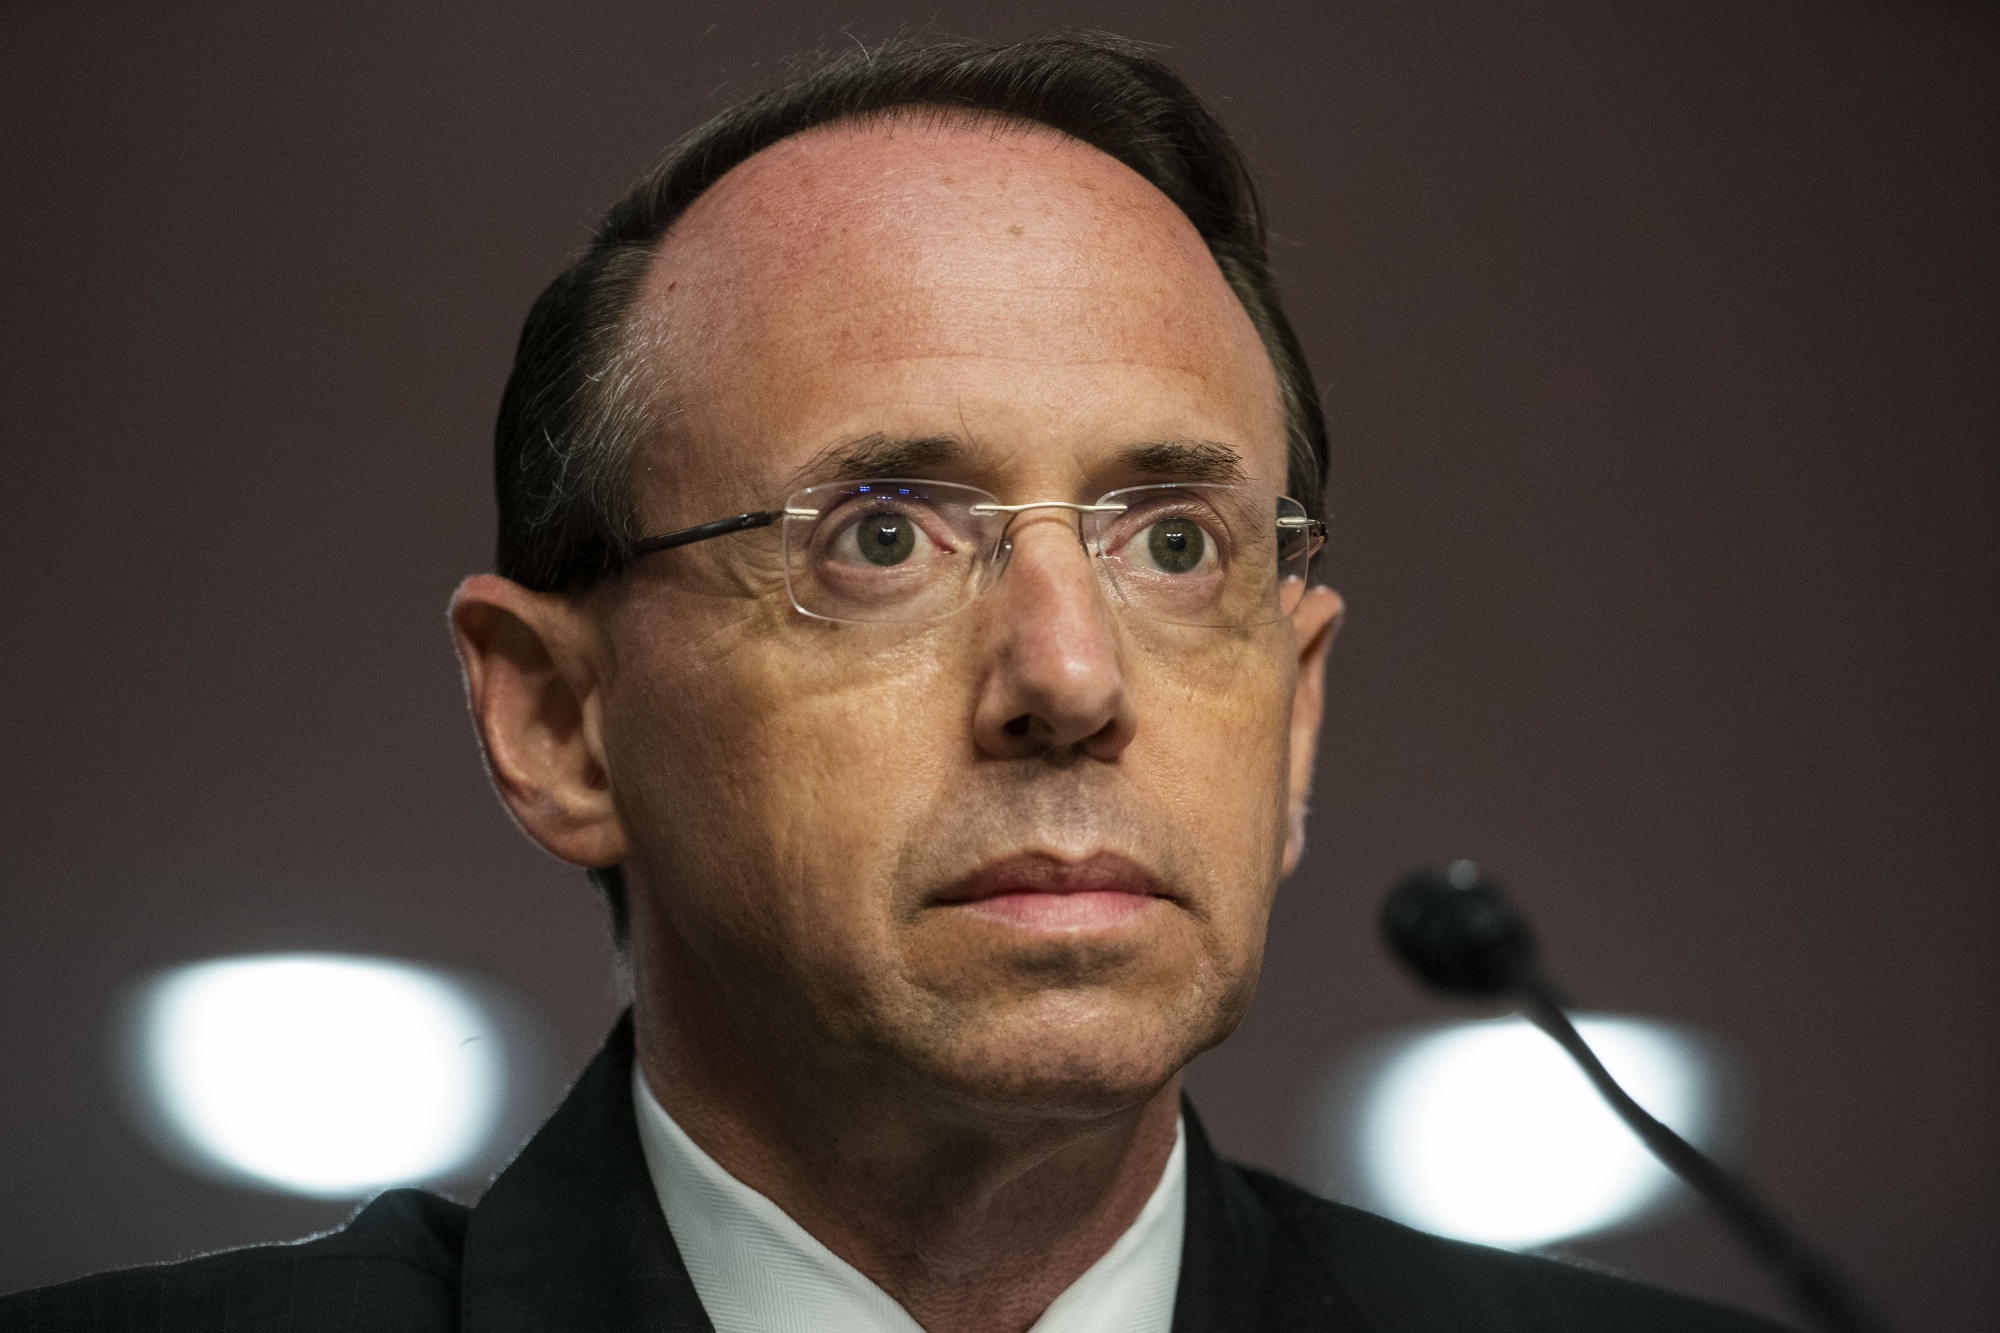 Rod Rosenstein, former deputy attorney general, sits during a Senate Judiciary Committee hearing in Washington on June 3, 2020.&nbsp;